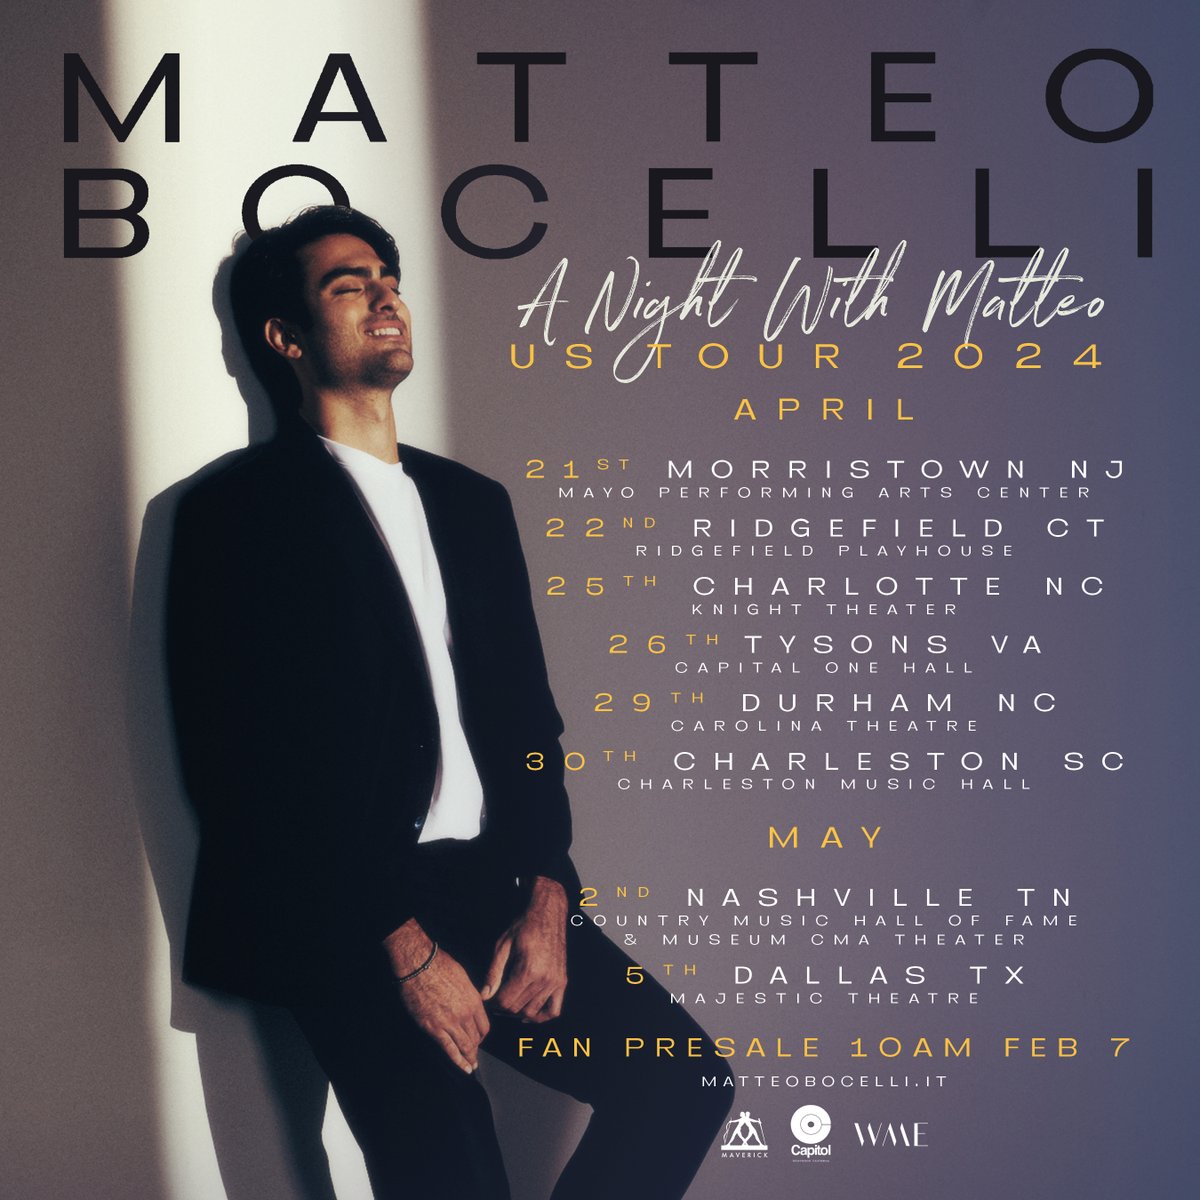 US fans, I’m coming back to you 😎 A Night With Matteo returns to the States this spring! Tickets on sale Feb 9, but subscribe to my mailing list at matteobocelli.it to get early presale access. Get ready 🙌🏻